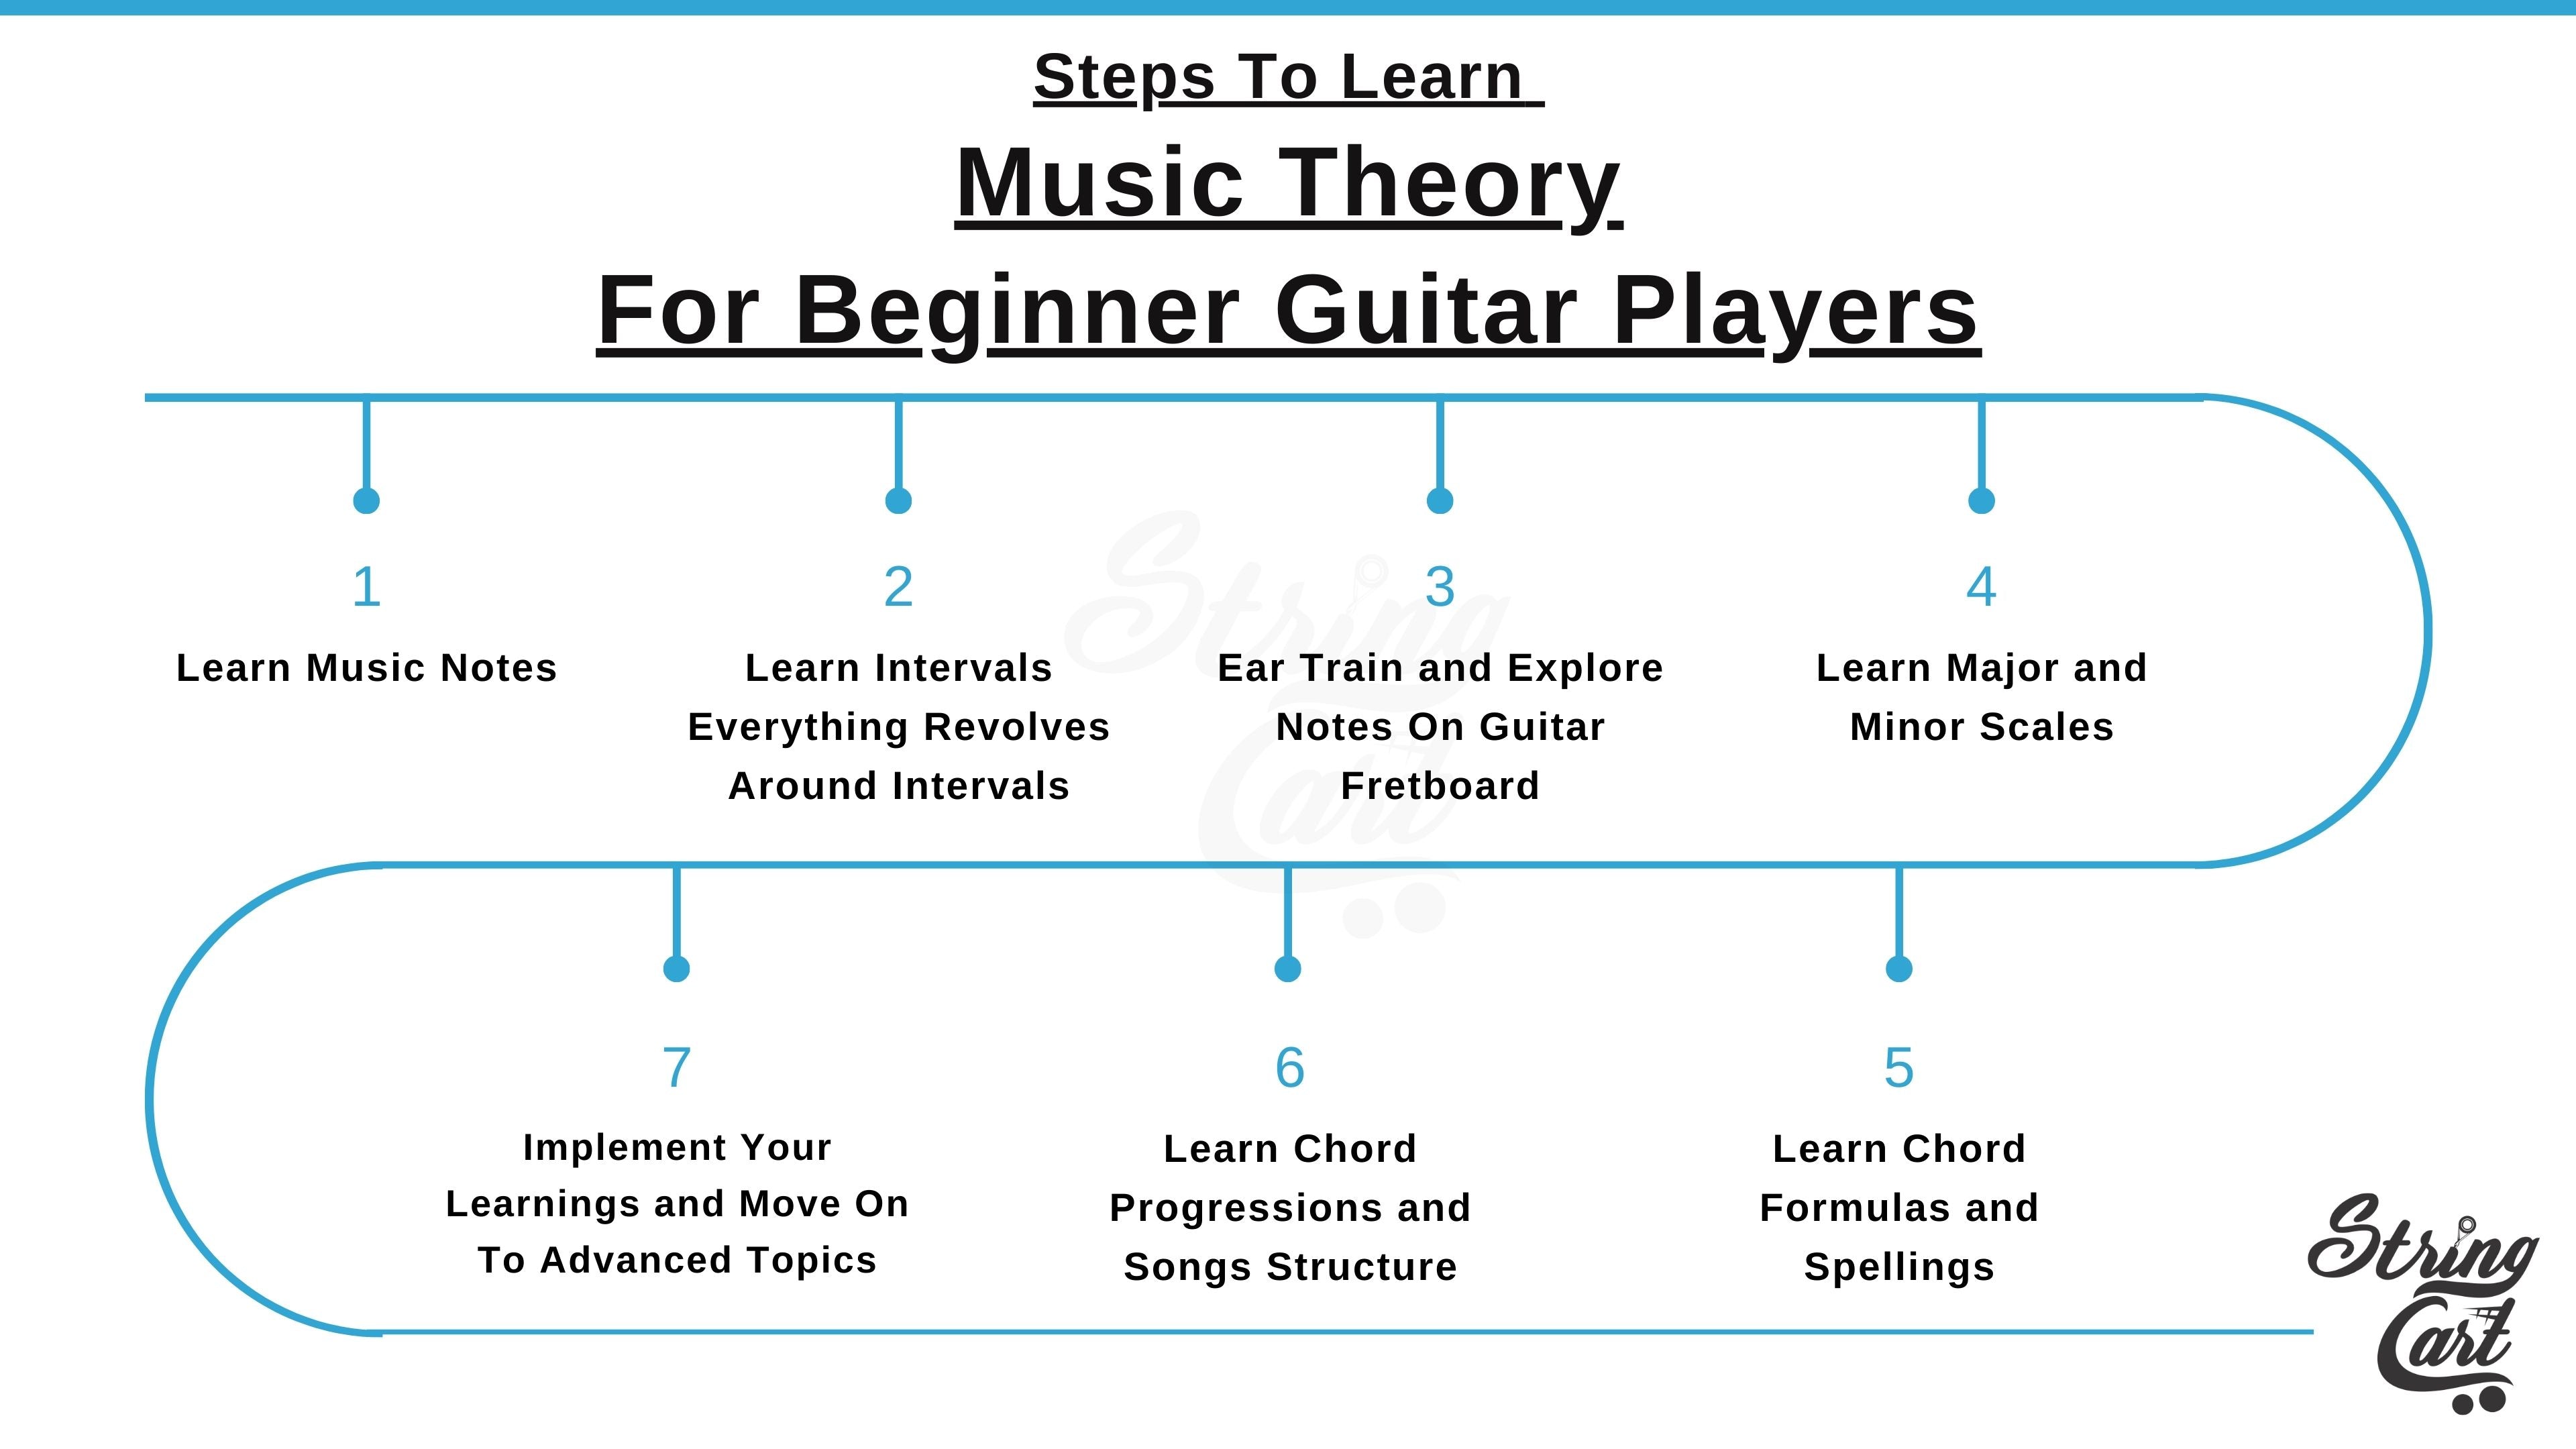 Steps To Learn Music Theory For Beginners